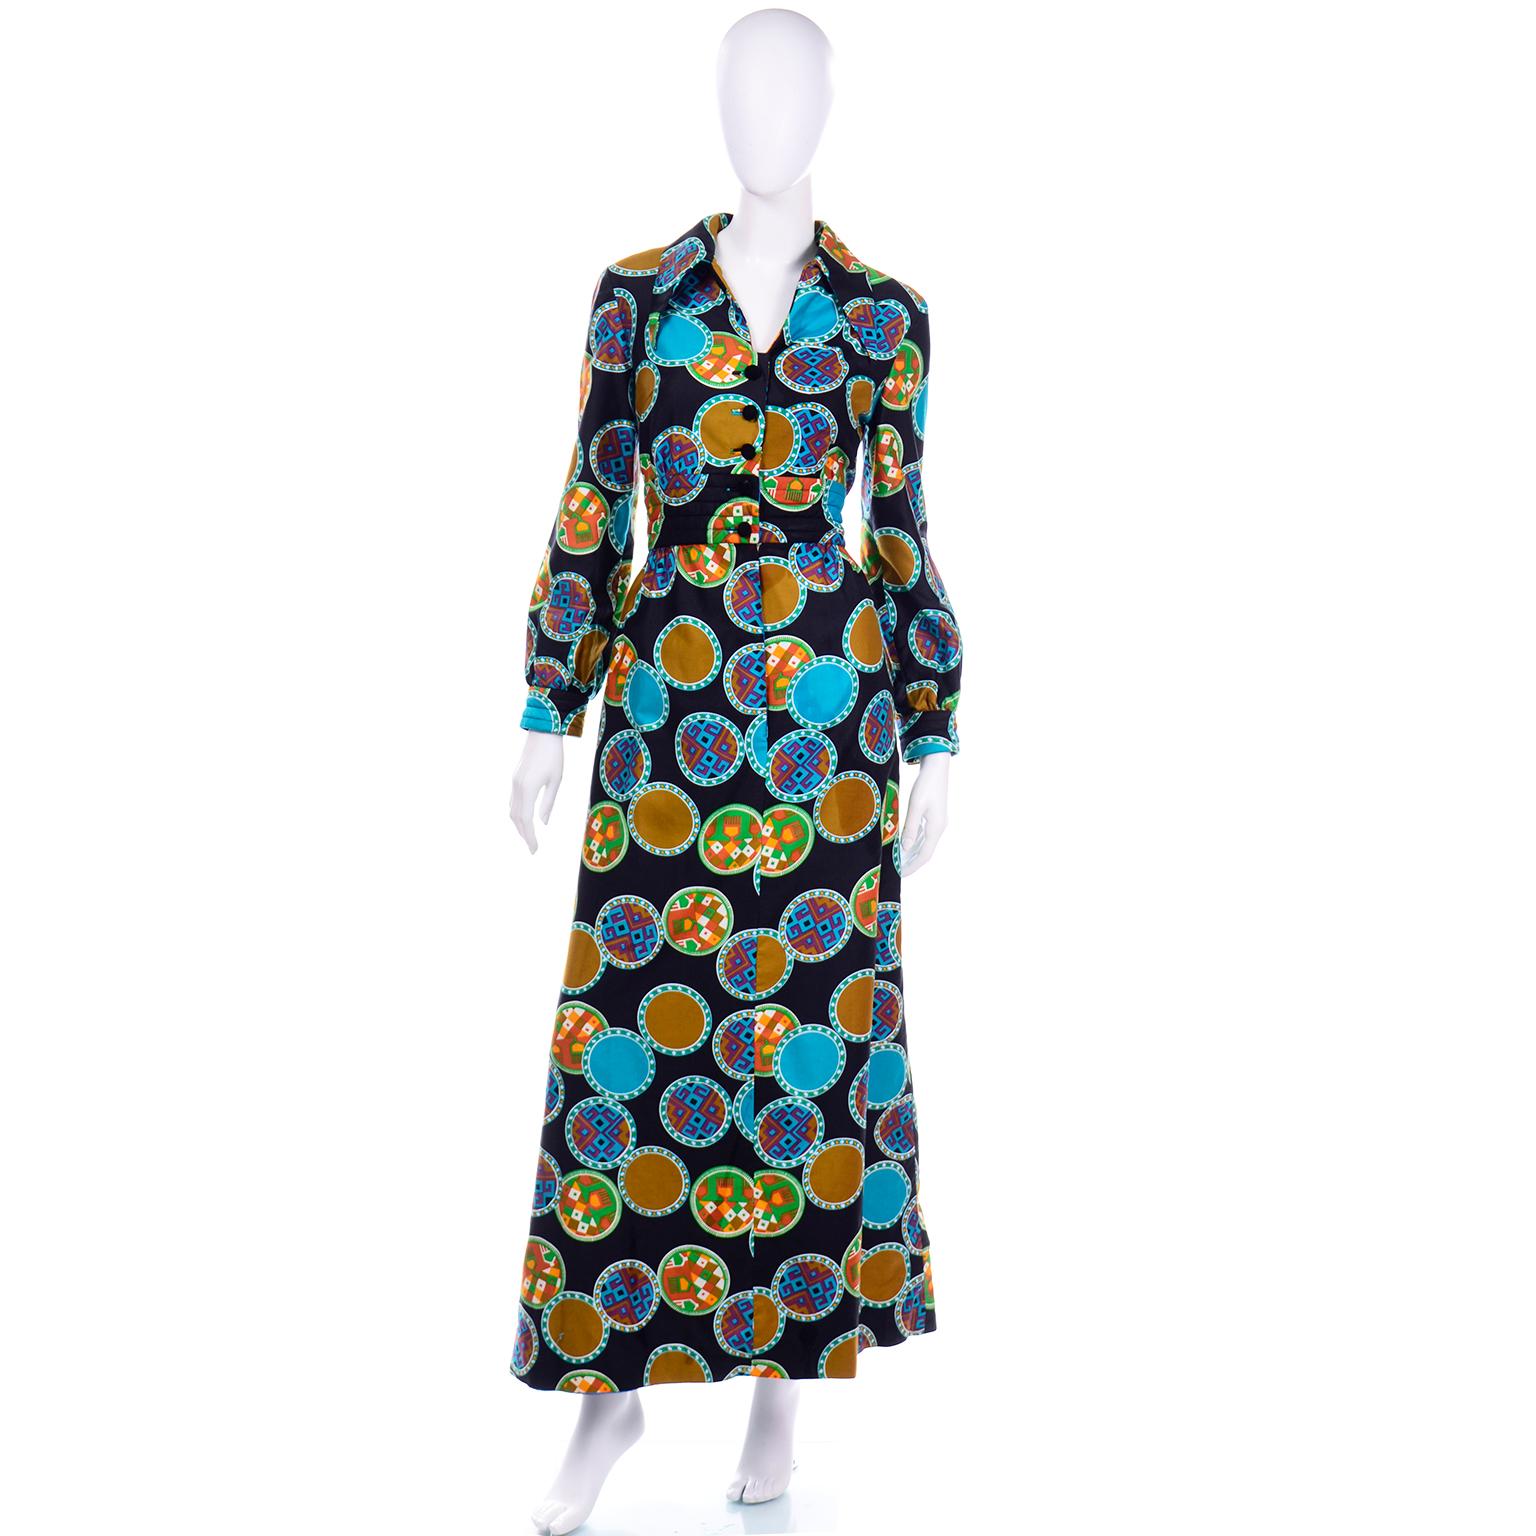 This is a pretty vintage Dynasty early 1970's collared maxi dress with a colorful circle medallion print. We always grab these Dynasty dresses whenever we can find them because they were so well made in such beautiful fabrics. This  long sleeve maxi